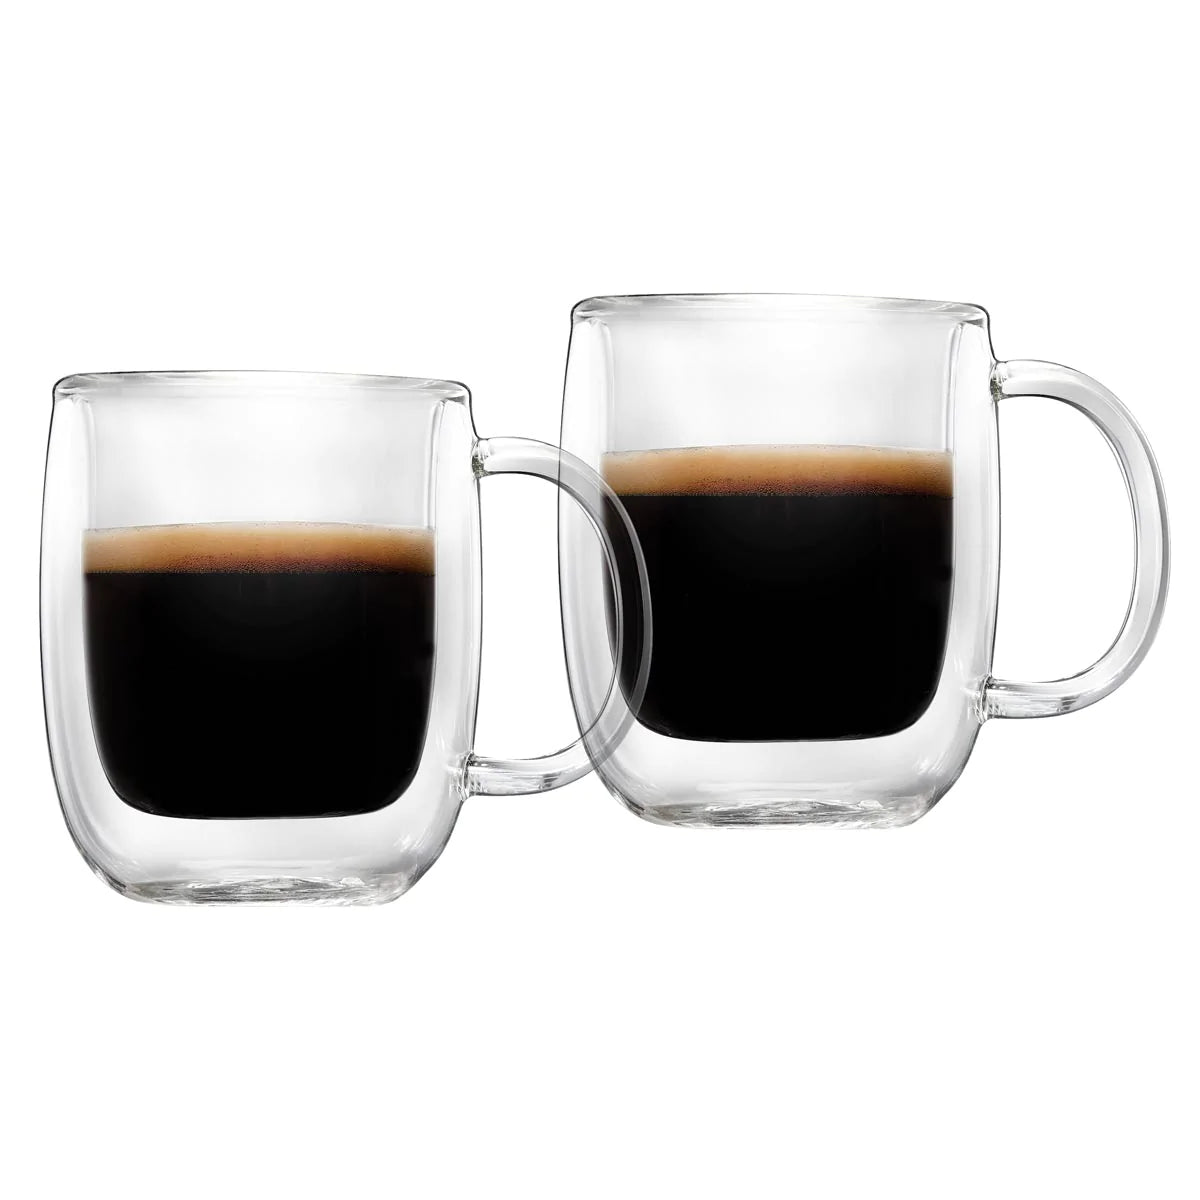 Double-walled espresso cups 80 ml, 2 units, by Barista+